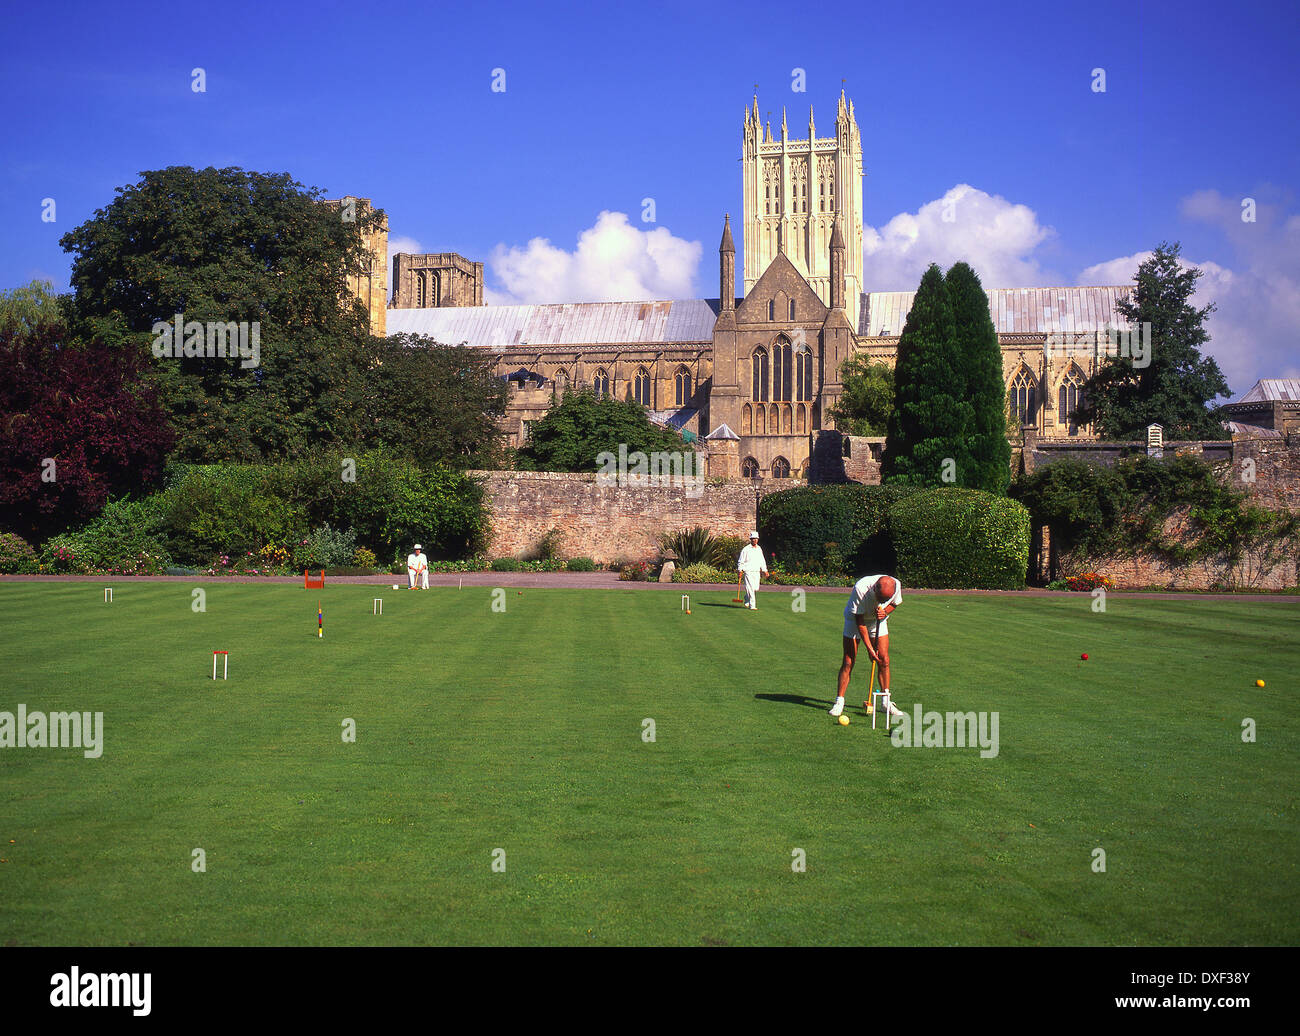 The bishops palace croquet club and lawns with Wells Cathedral in view.Bishops-palace,City of Wells,Avon,Somerset.England. Stock Photo